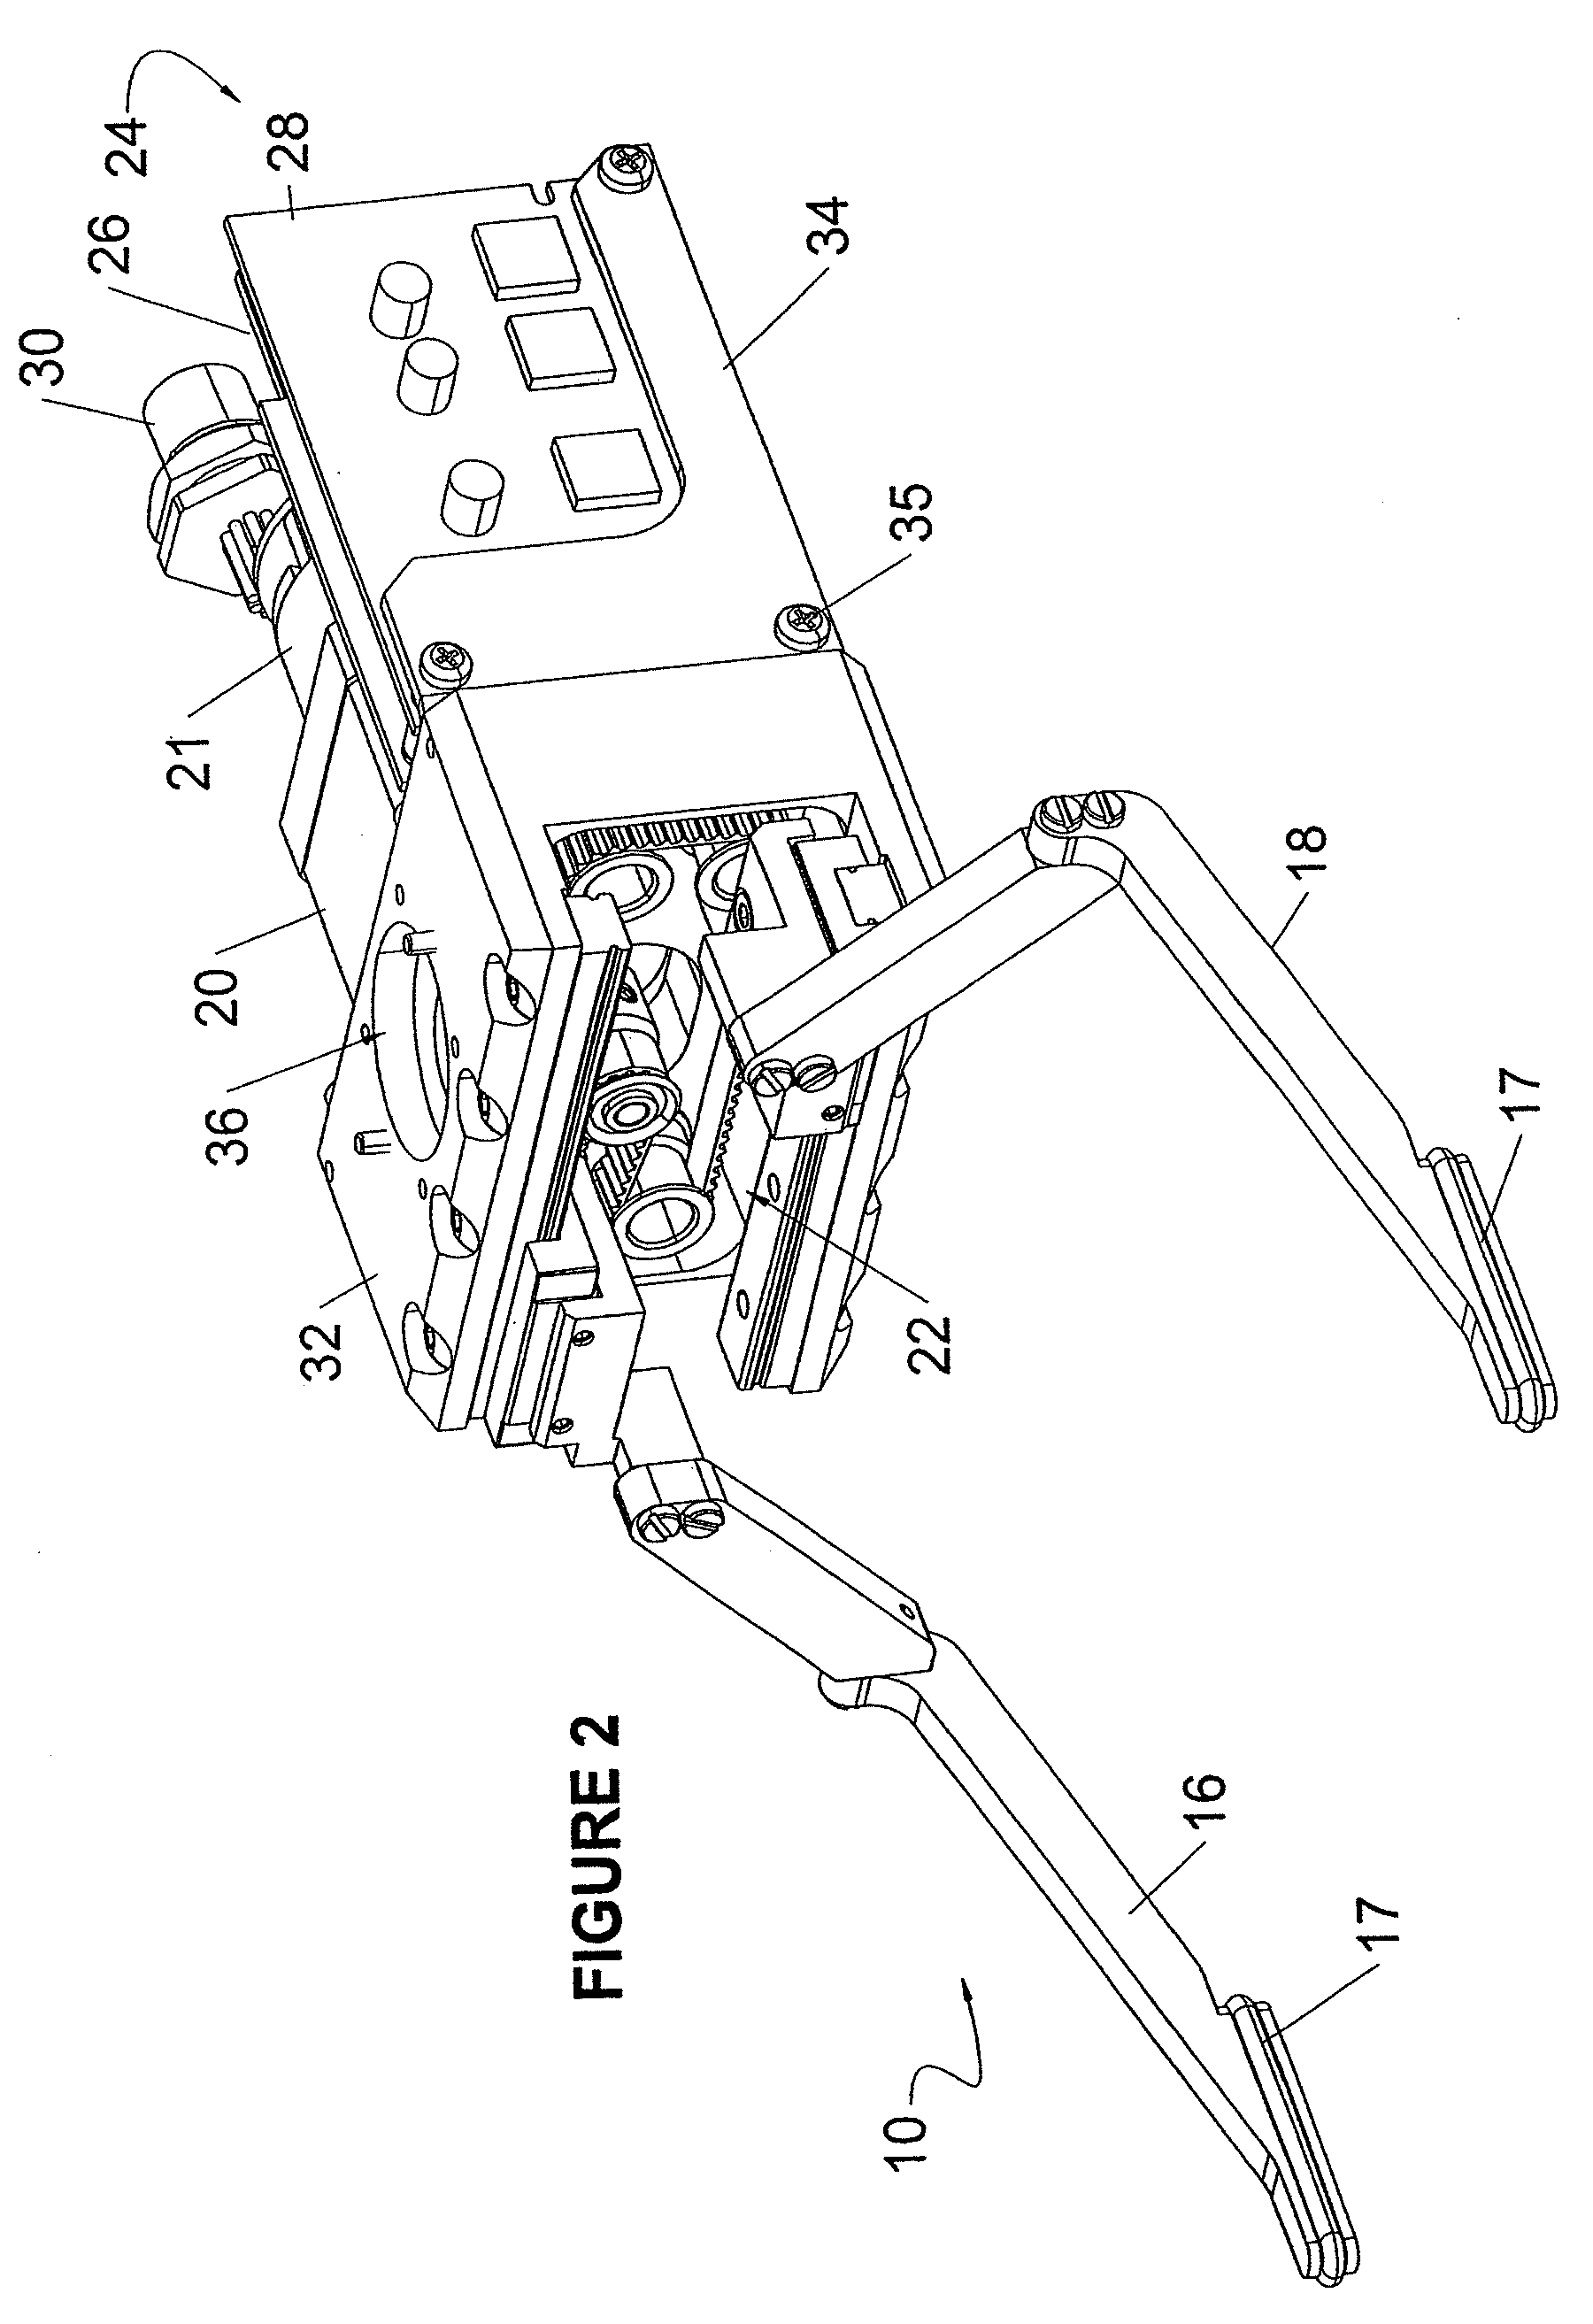 Belt-driven robotic gripping device and method for operating